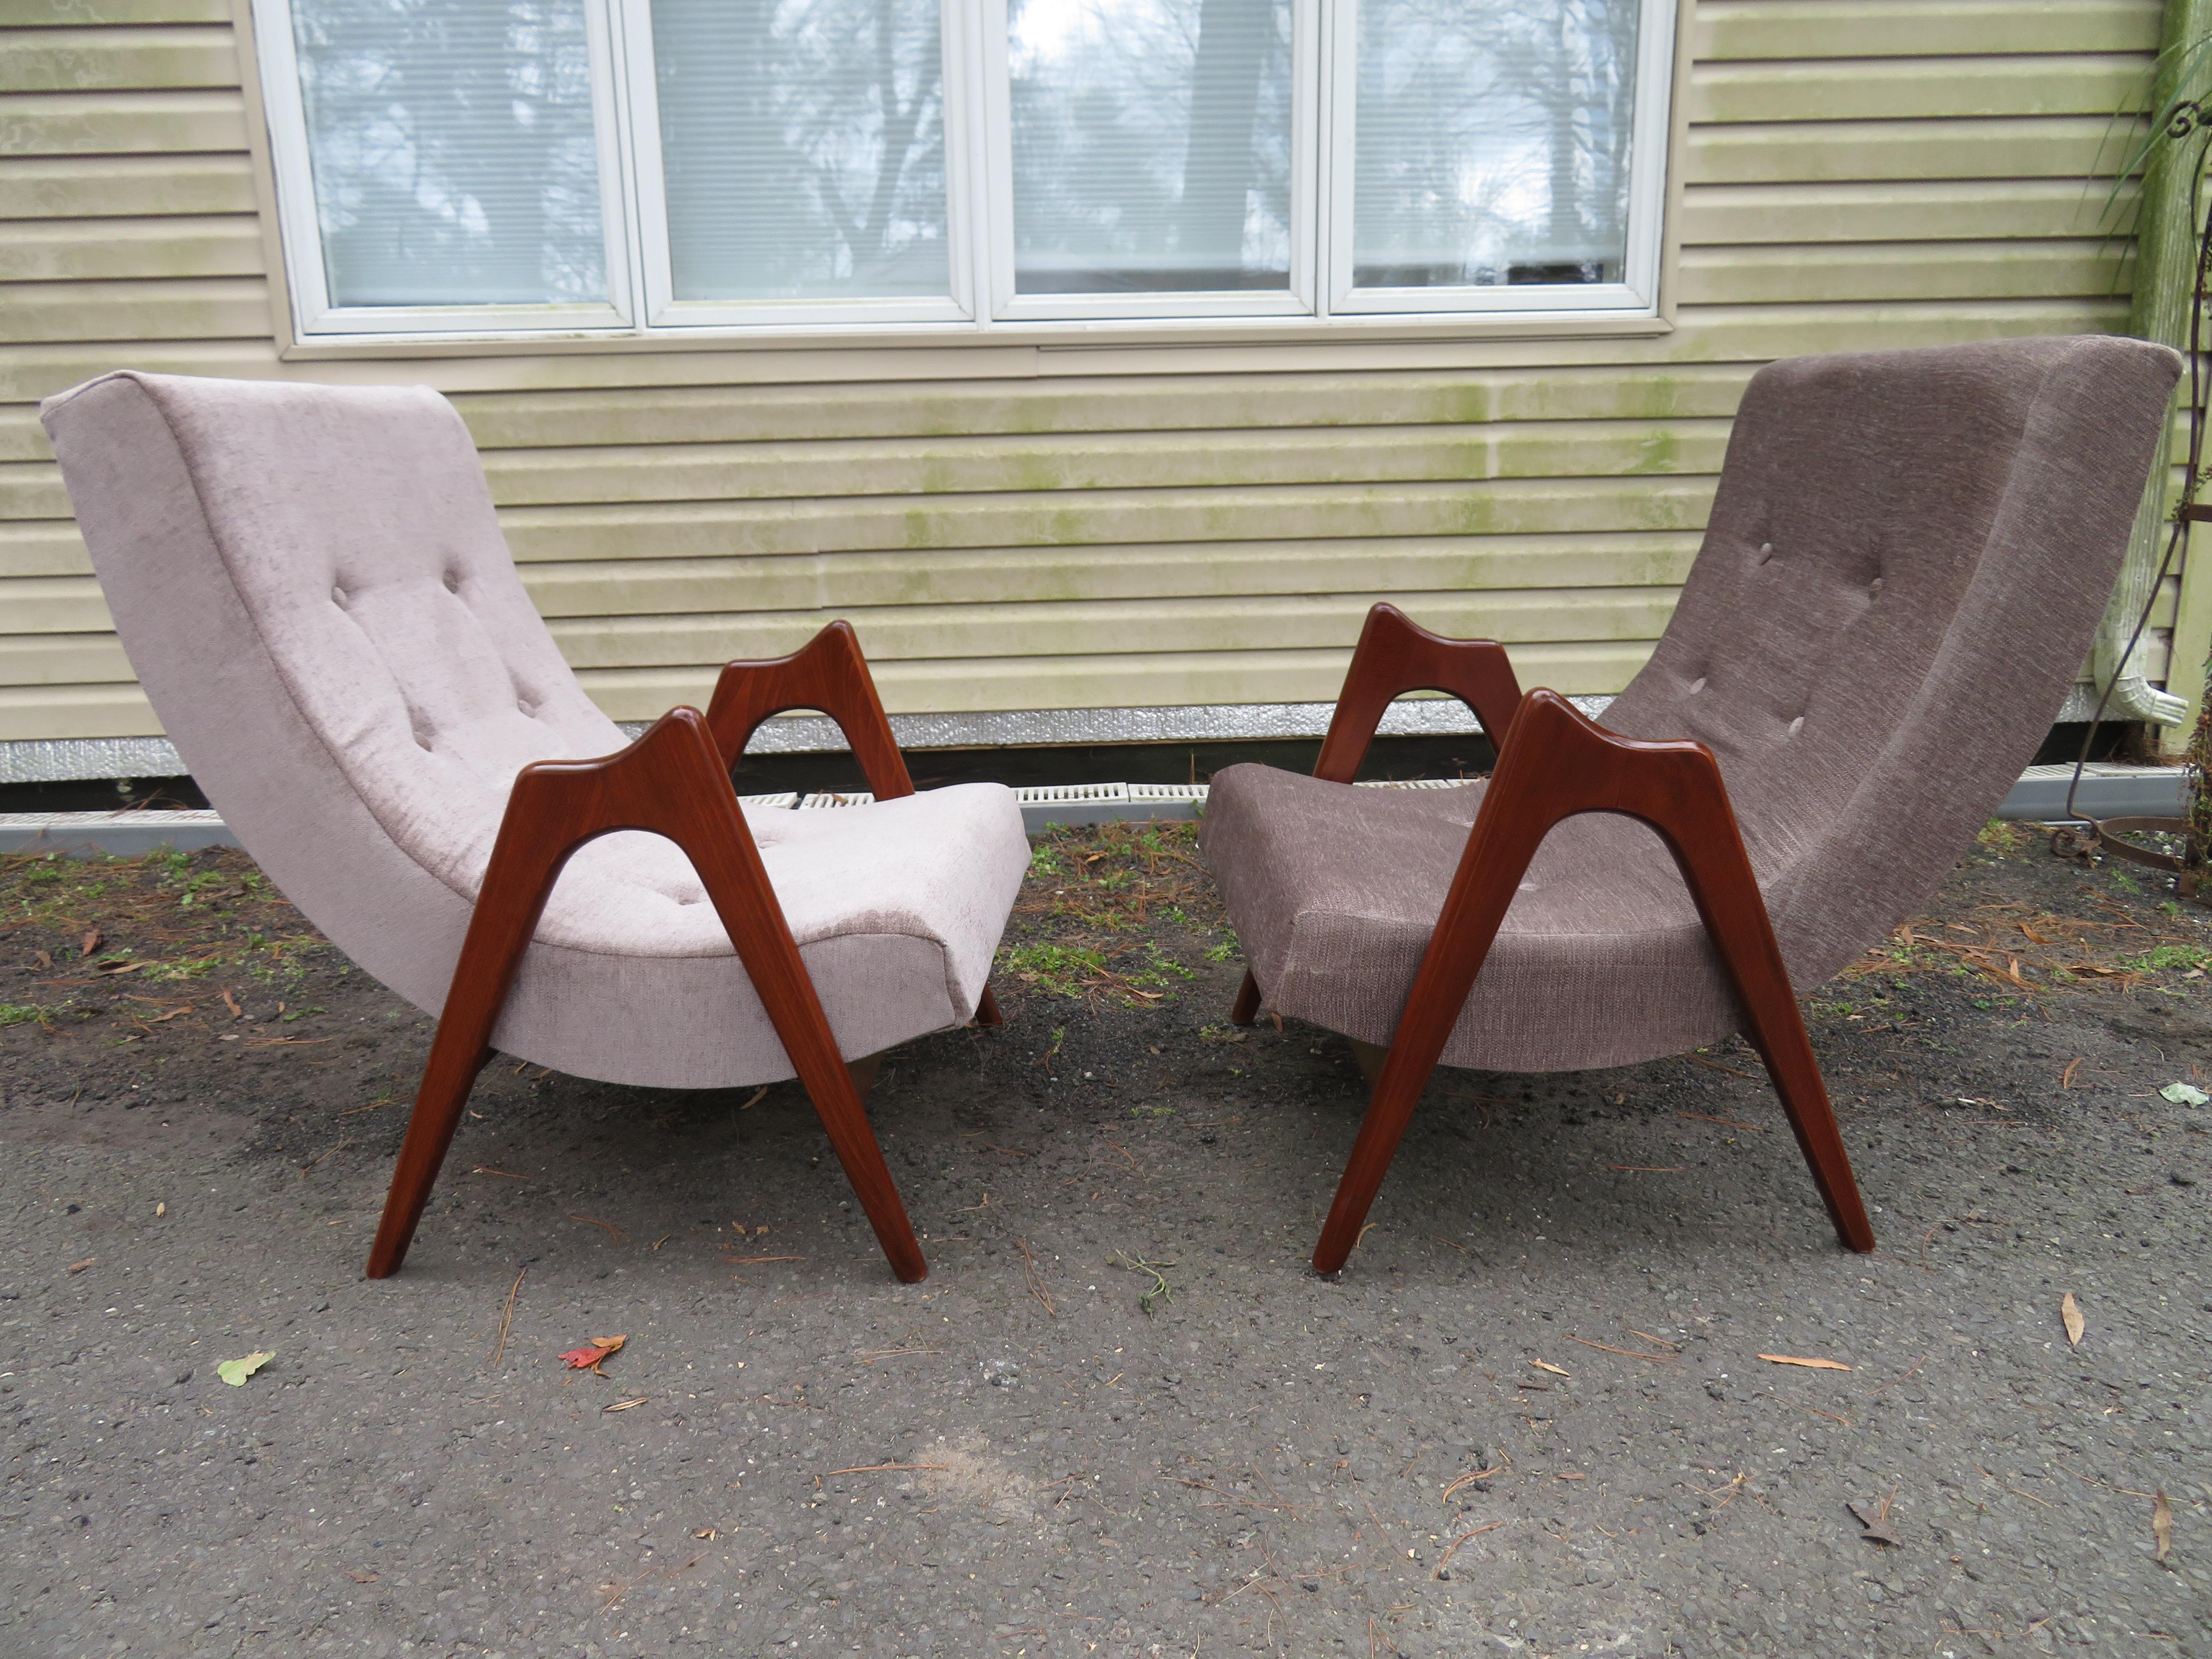 Lovely Pair of Adrian Pearsall sculptural walnut scoop chairs. This pair have been re-upholstered recently in a stunning beige grey velvet by the original owners and look great. The frames also look as though they may have been refinished and look